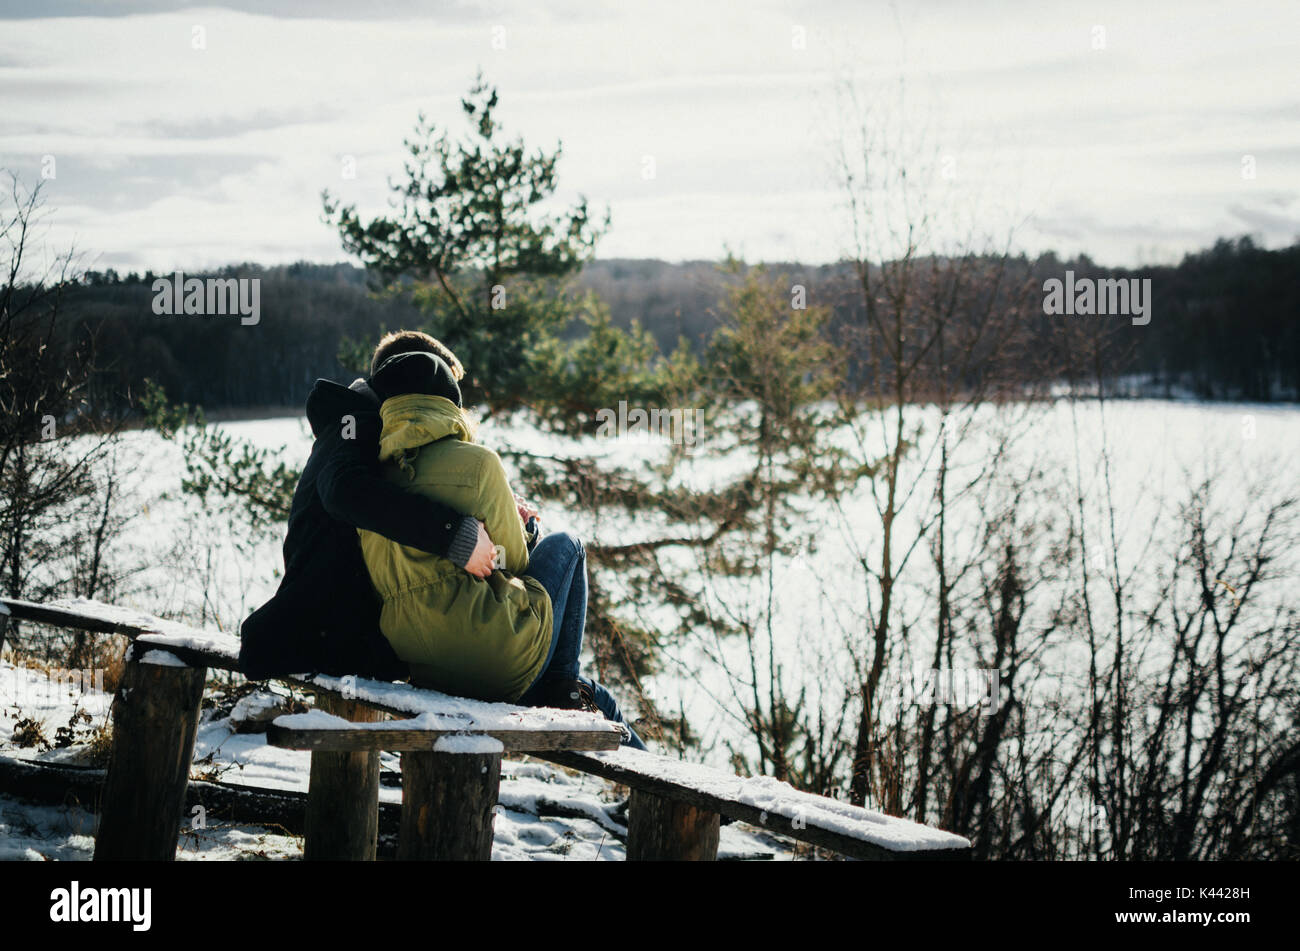 Joyful cute couple in warm clothes embraces. Young man hugs a girl. Couple sit on wooden bench in winter and look at frozen lake between forest. The c Stock Photo